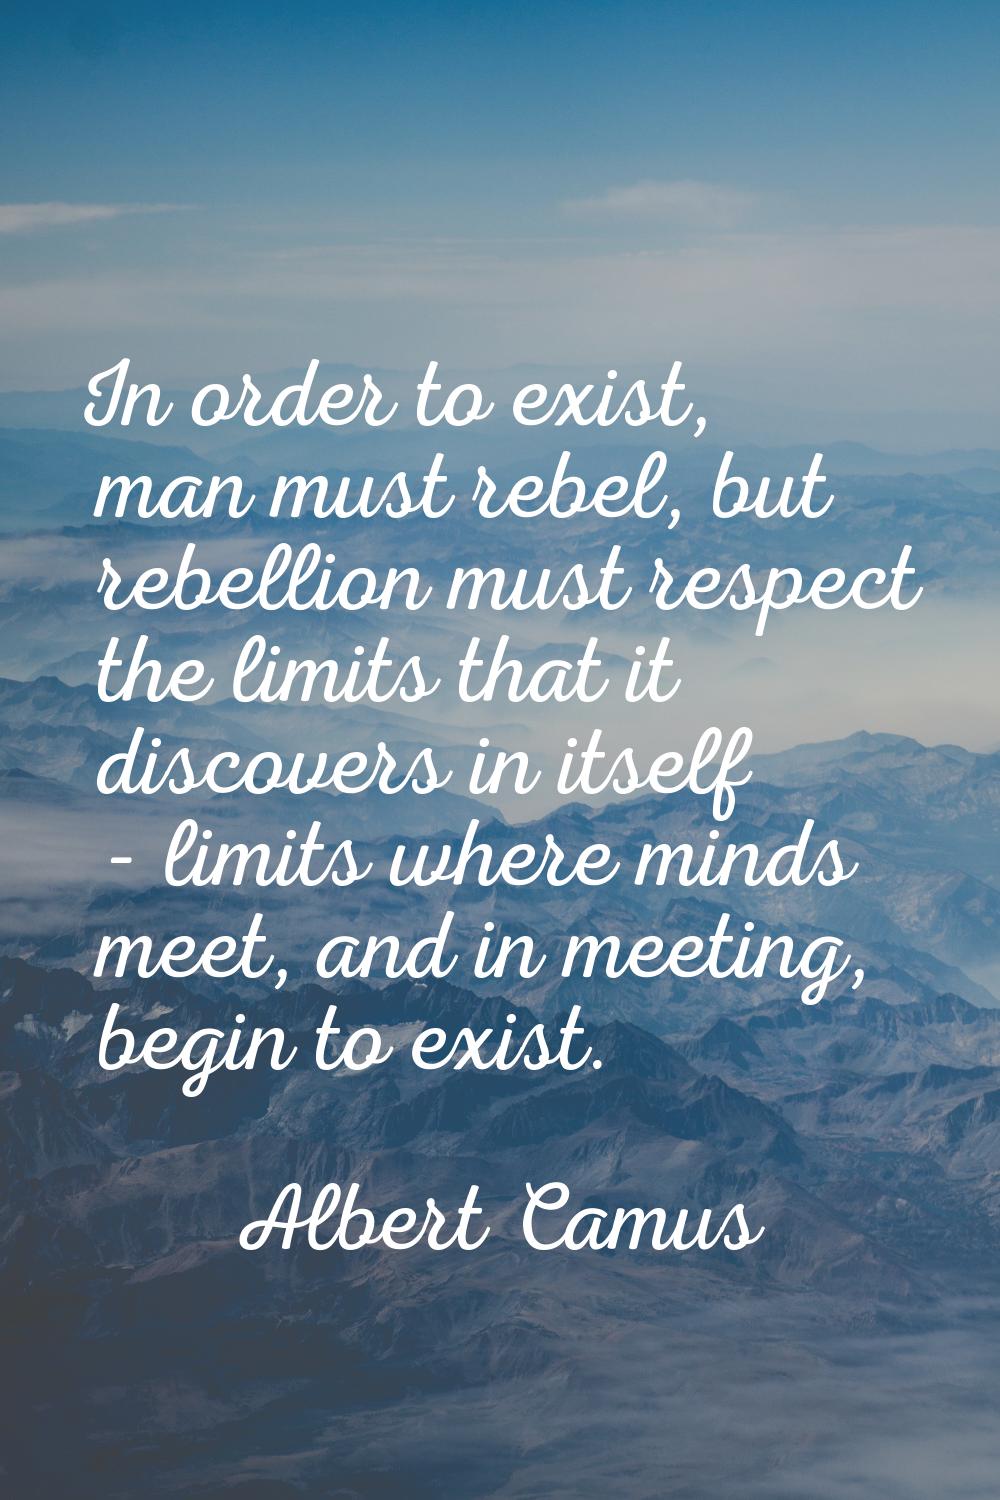 In order to exist, man must rebel, but rebellion must respect the limits that it discovers in itsel